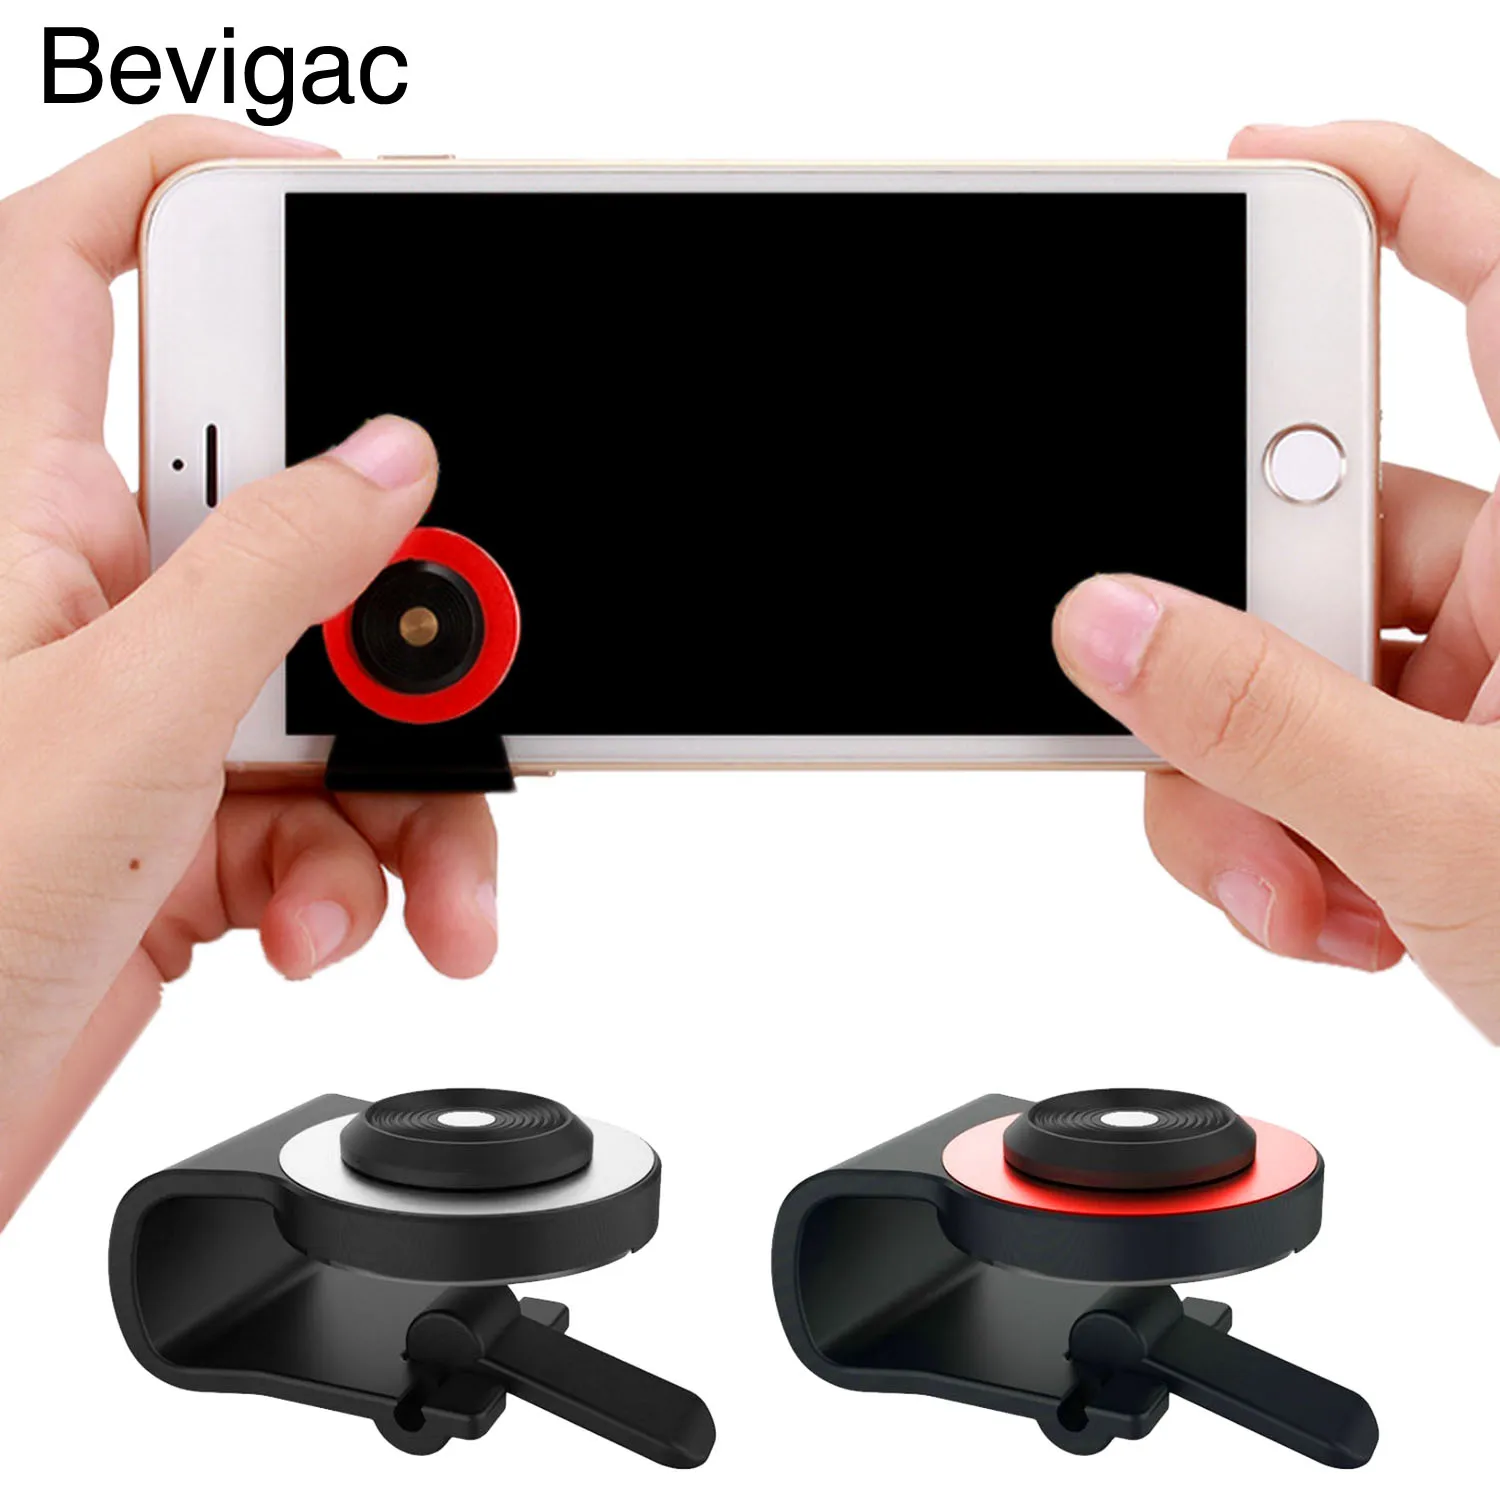 

Bevigac Universal Mobile Phone Smartphone Clip-on Mini Game Touch Screen Joystick Joypad for Ipad Tablet Accessories Gadgets